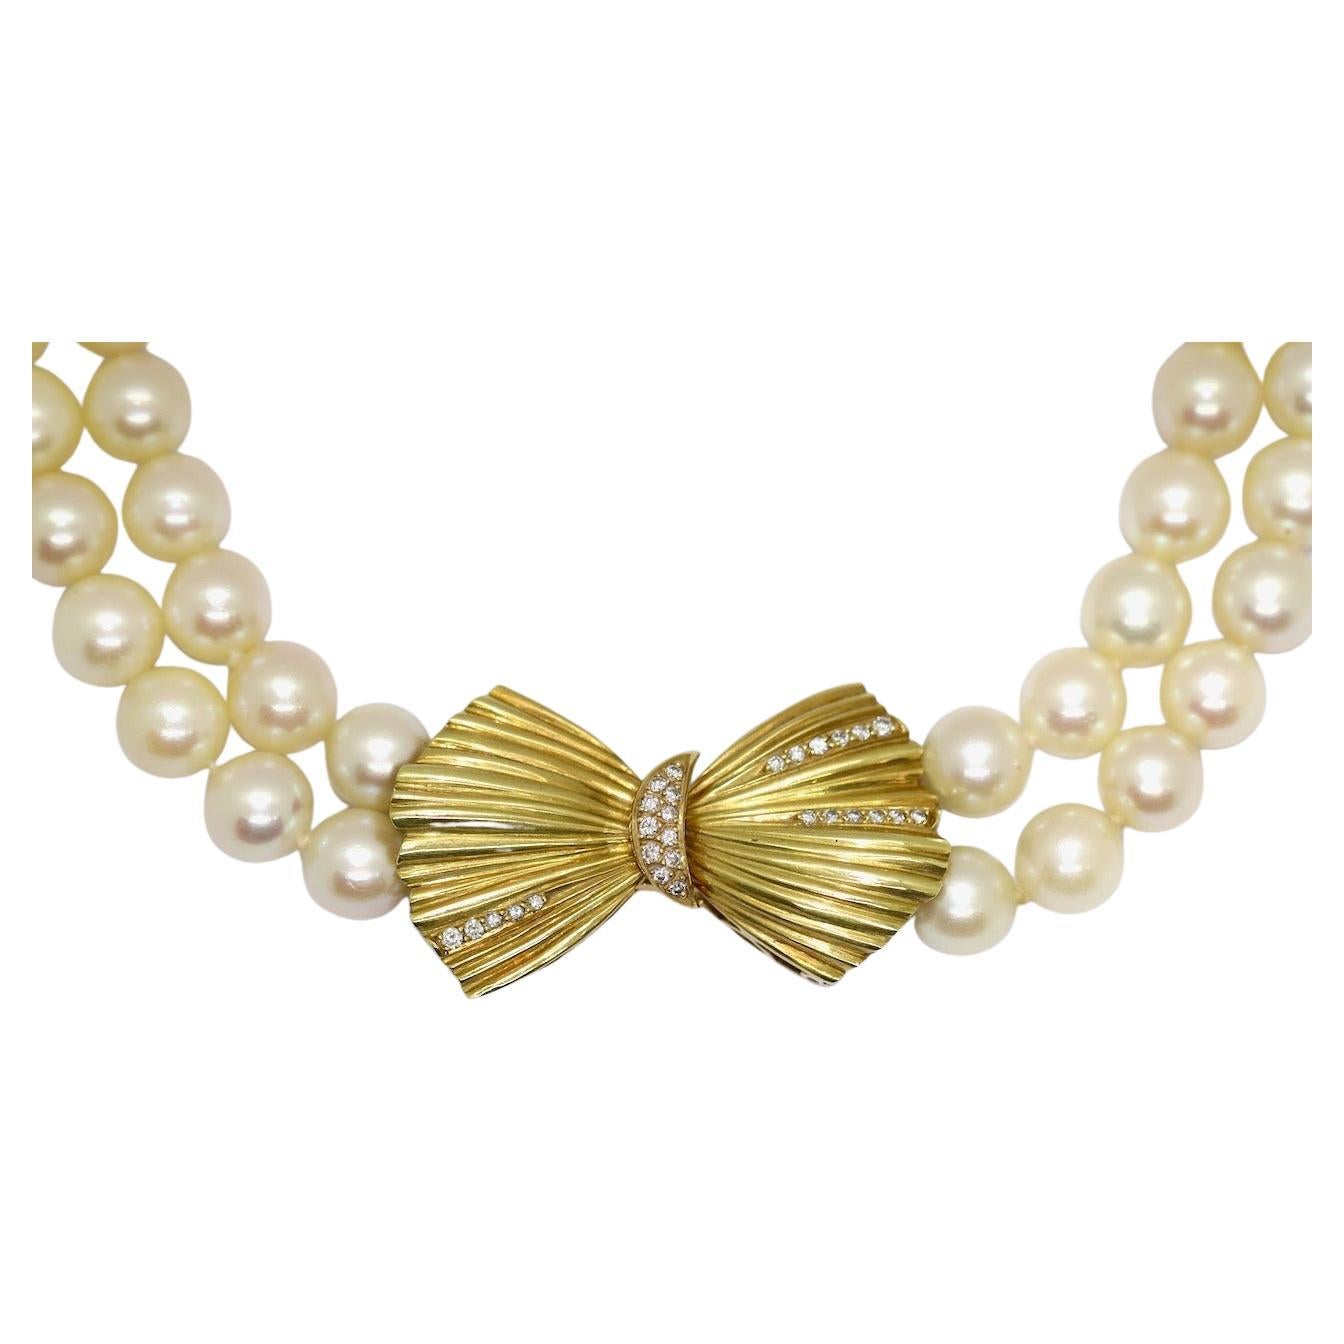 Double Strand Pearl Necklace with 18 Karat Gold Clasp and Diamonds